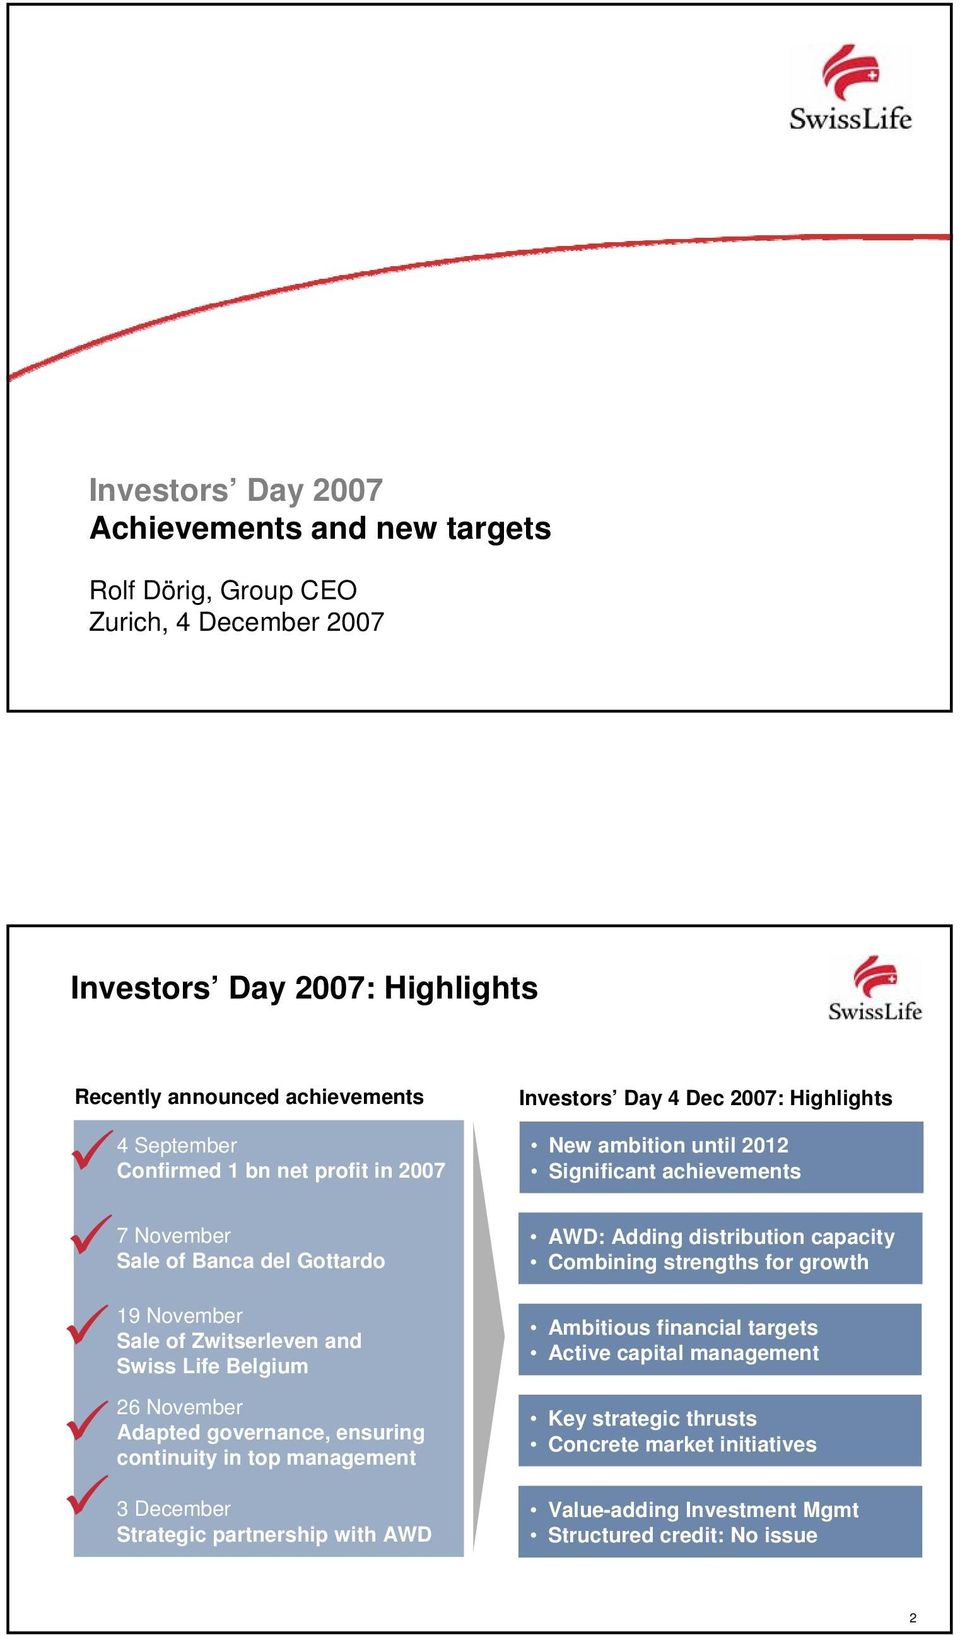 management 3 December Strategic partnership with AWD Investors Day 4 Dec 2007: Highlights New ambition until 2012 Significant achievements AWD: Adding distribution capacity